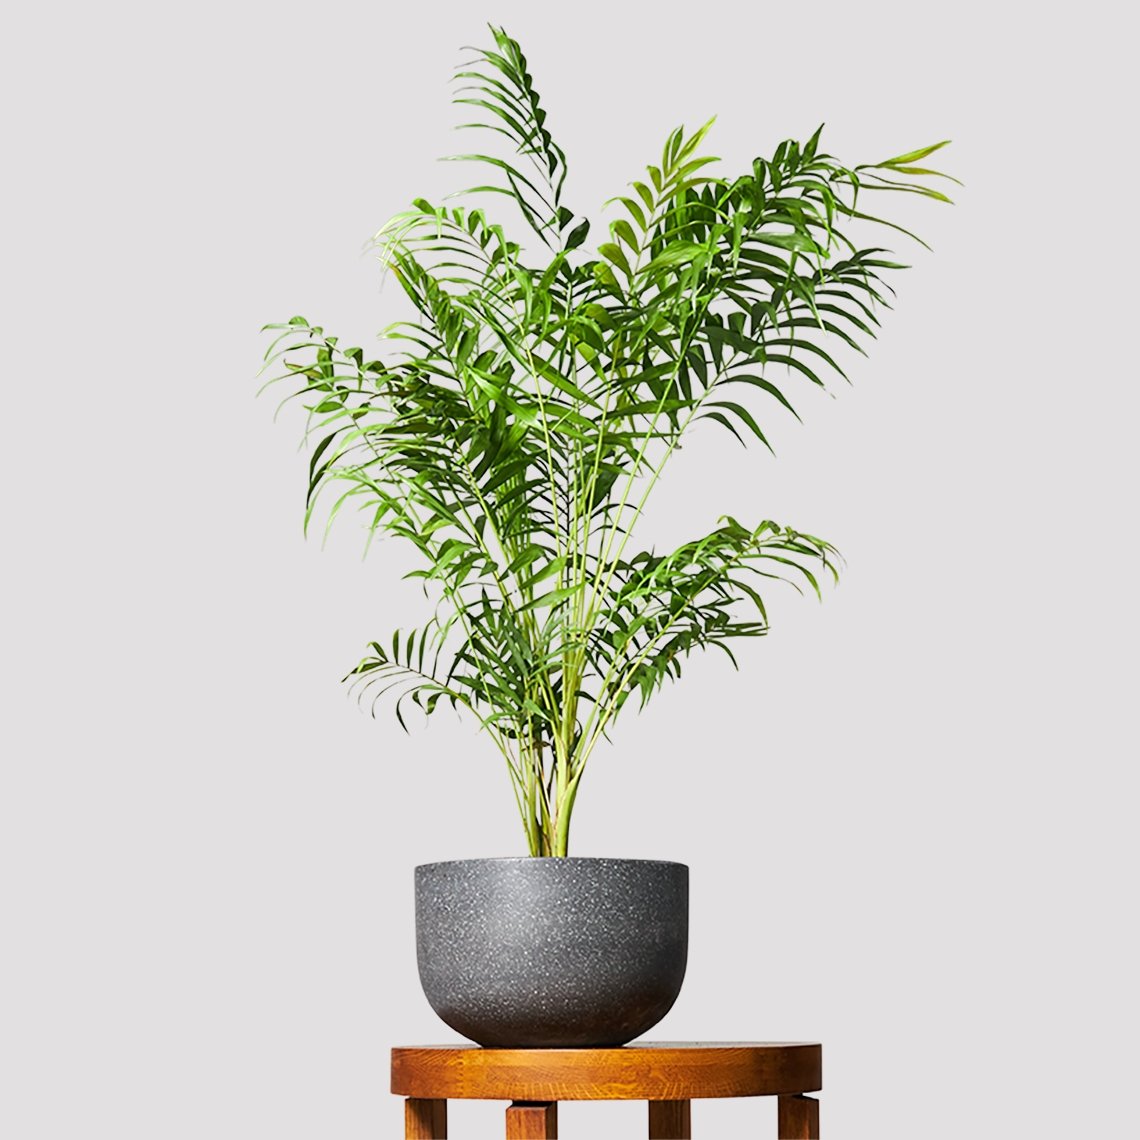 Bamboo Parlor Palm Indoor Plant sitting tall in a black pot